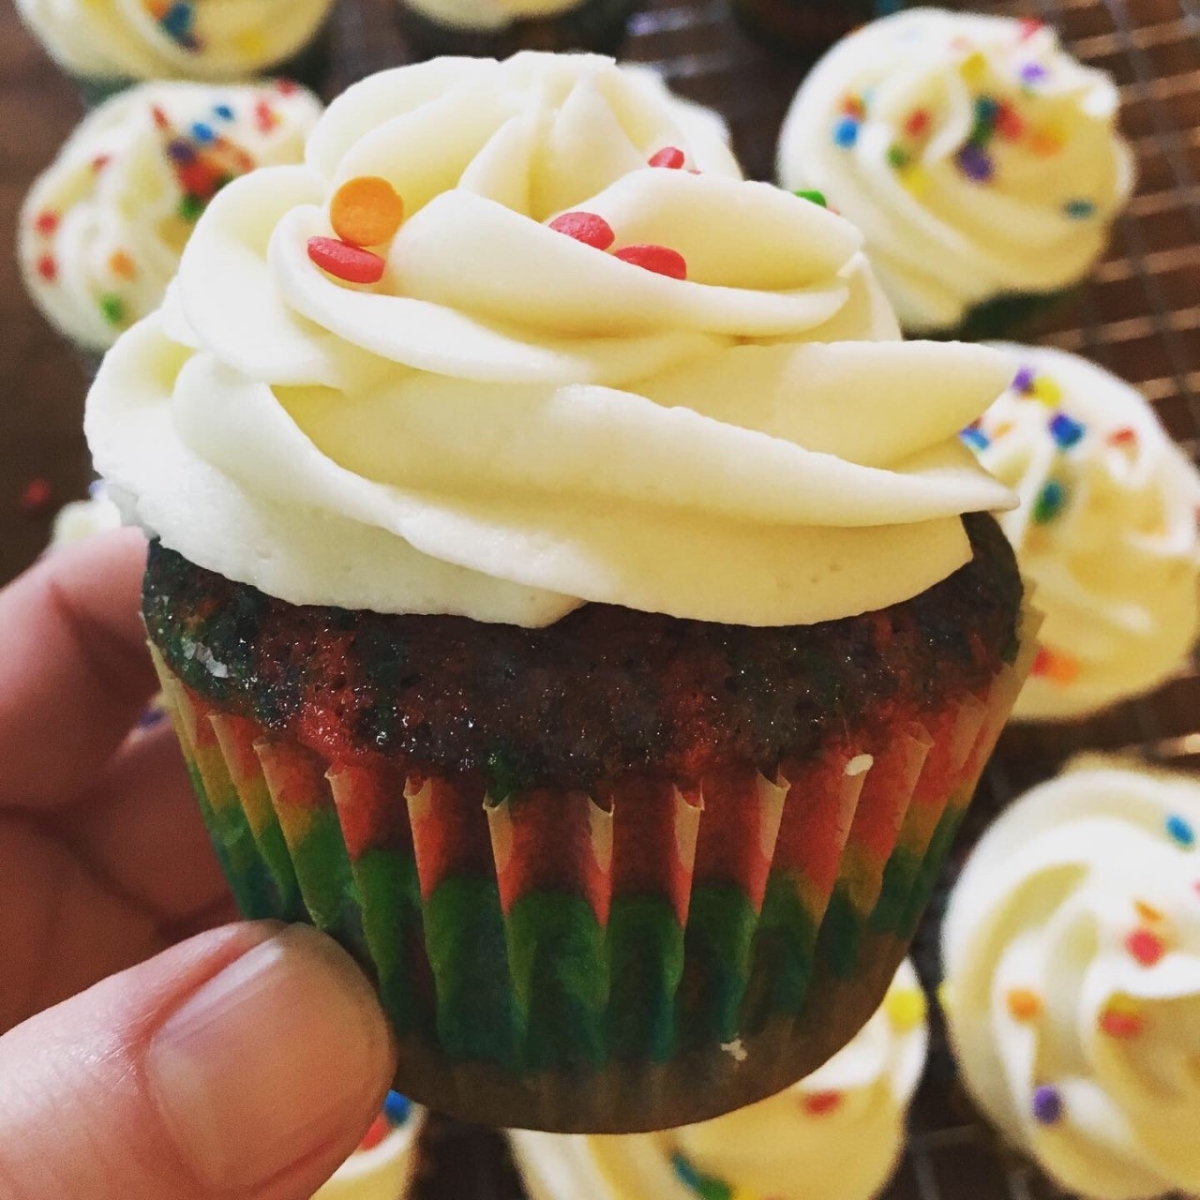 Rainbow cupcake with white vanilla frosting and some sprinkles on the top